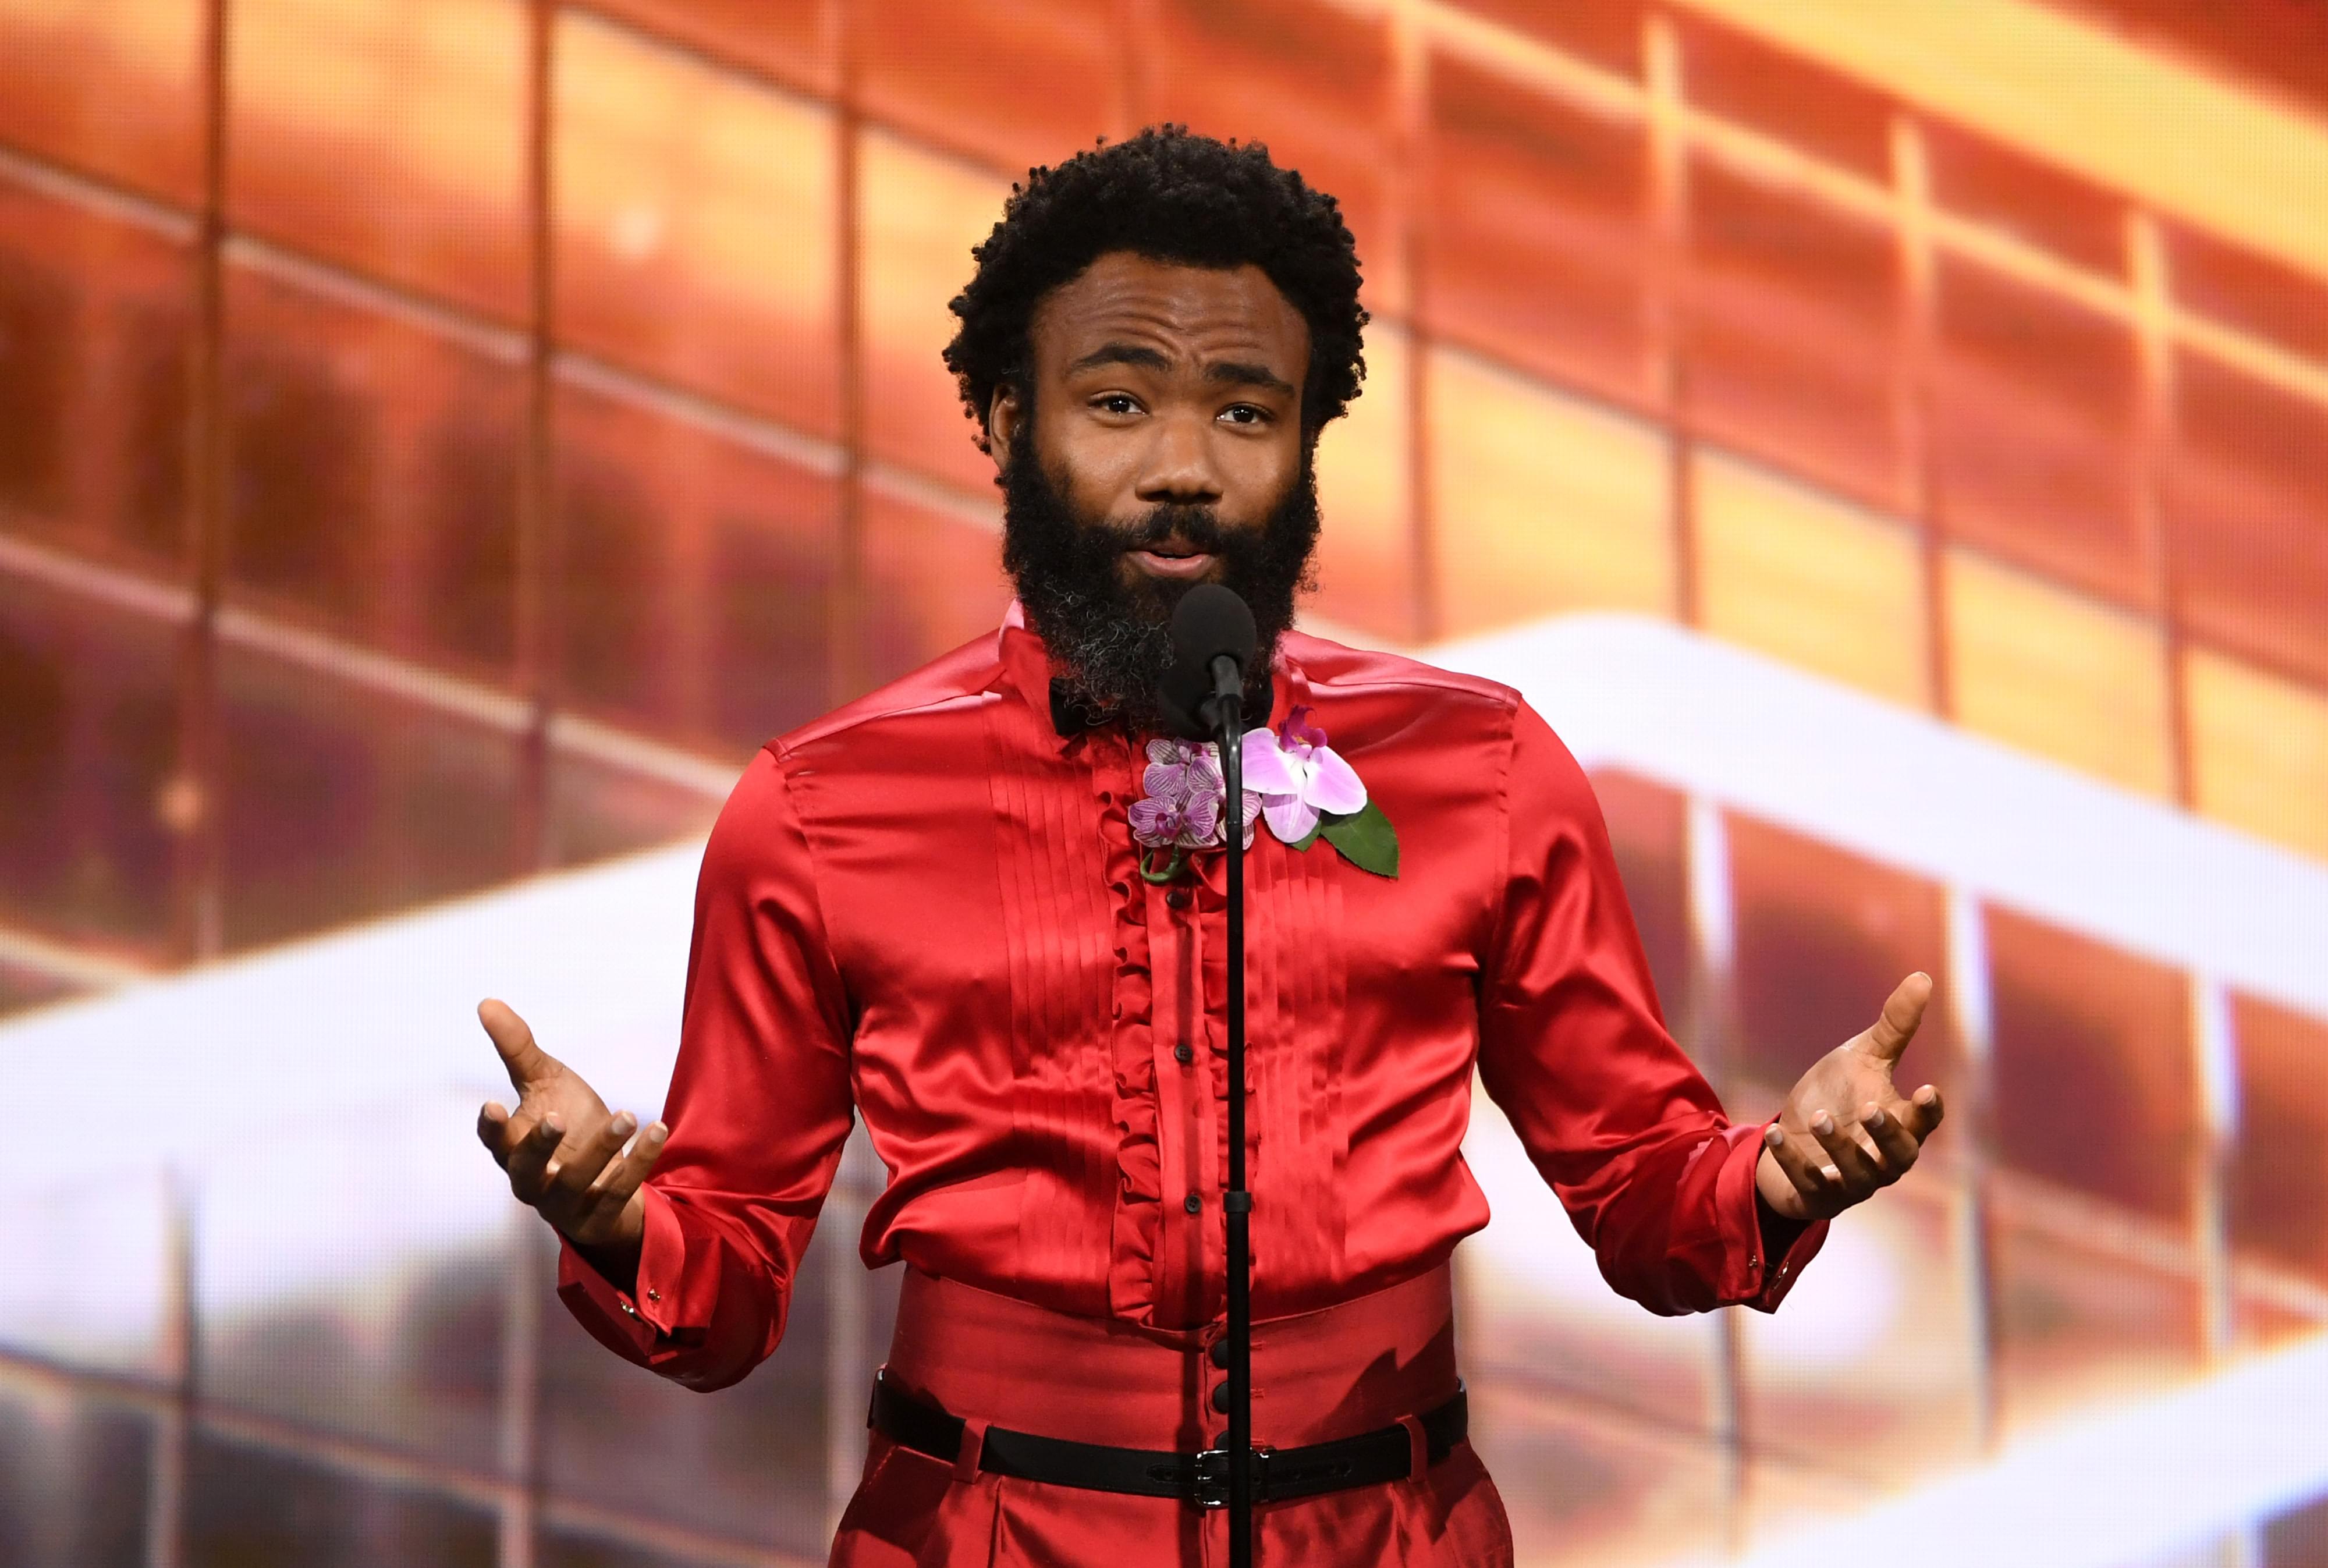 Donald Glover Drops Surprise, 12-Track Collection Featuring 21 Savage & SZA